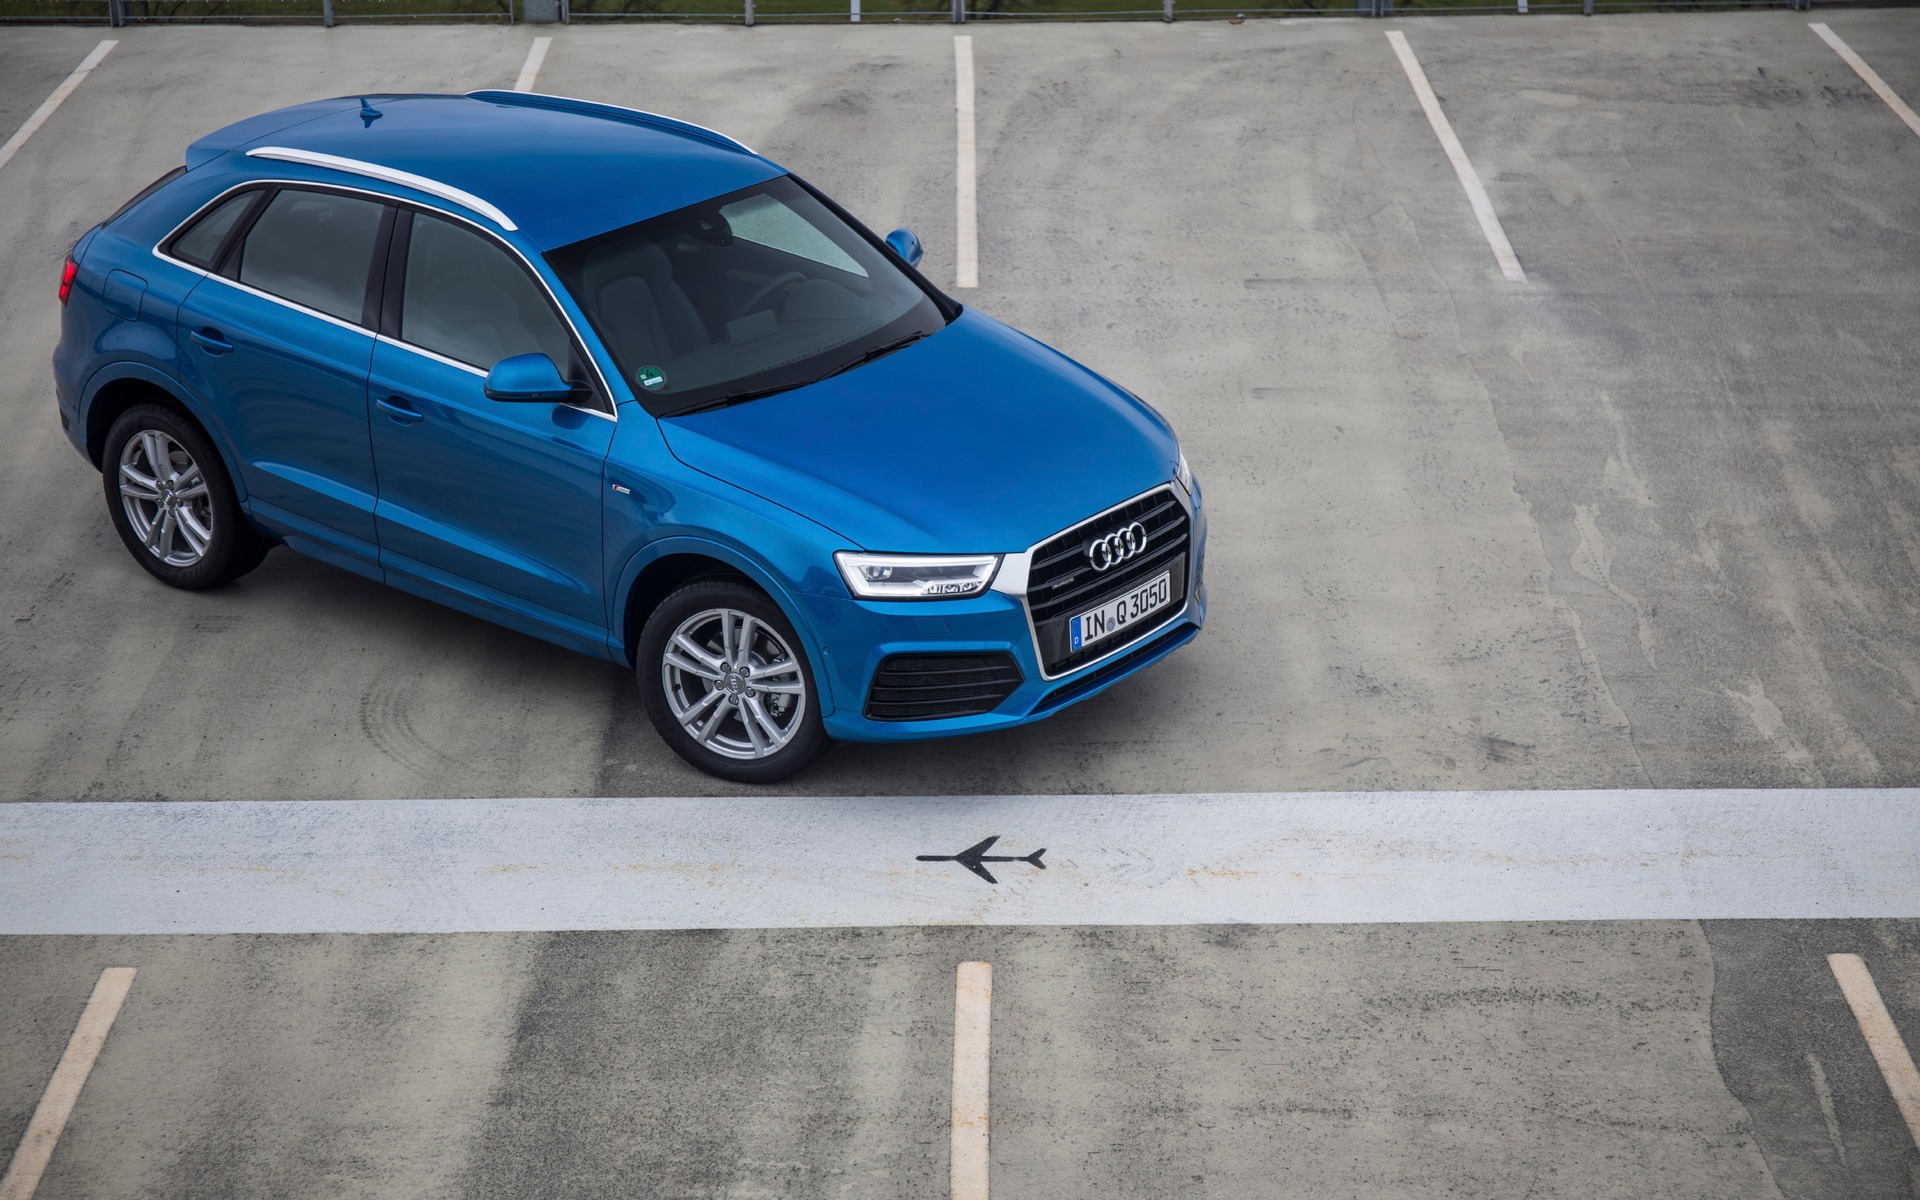 The Q3 is compact in size and its roofline plunges towards the back.